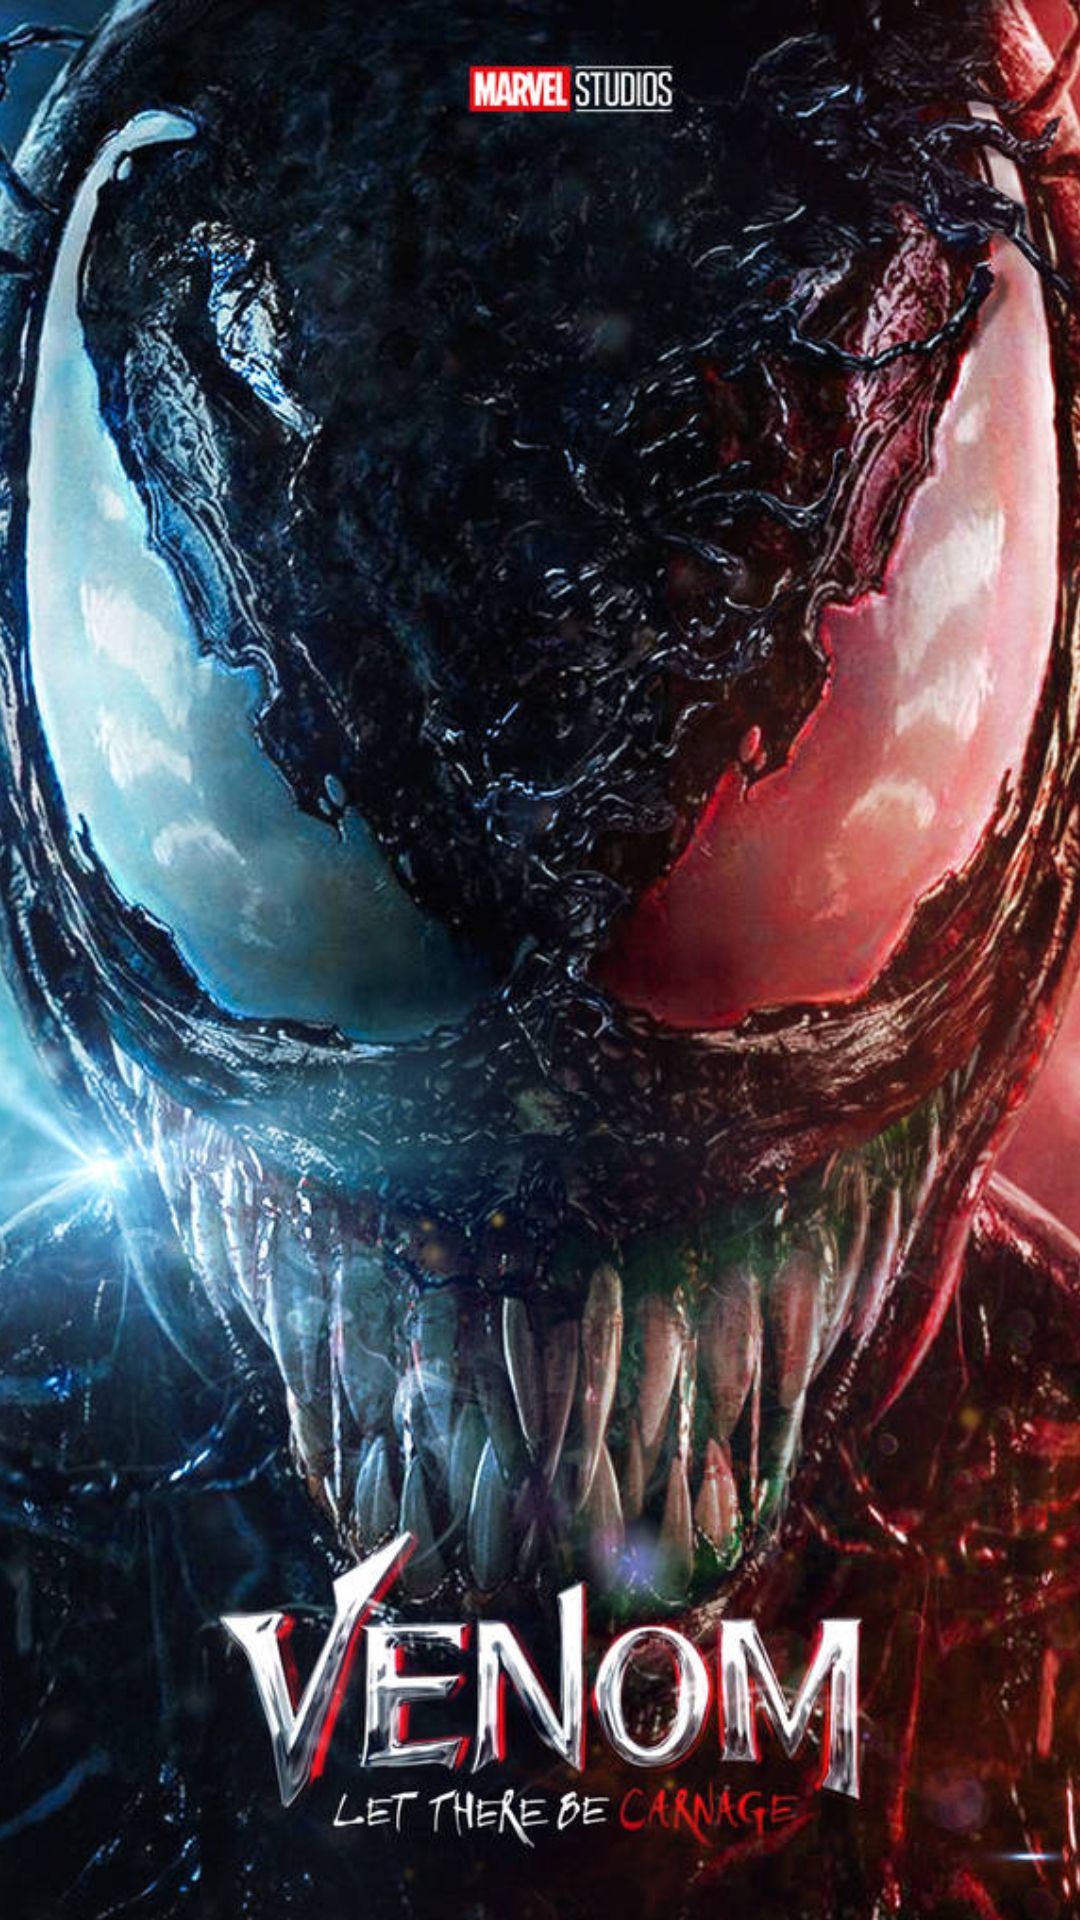 Download film venom let there be carnage